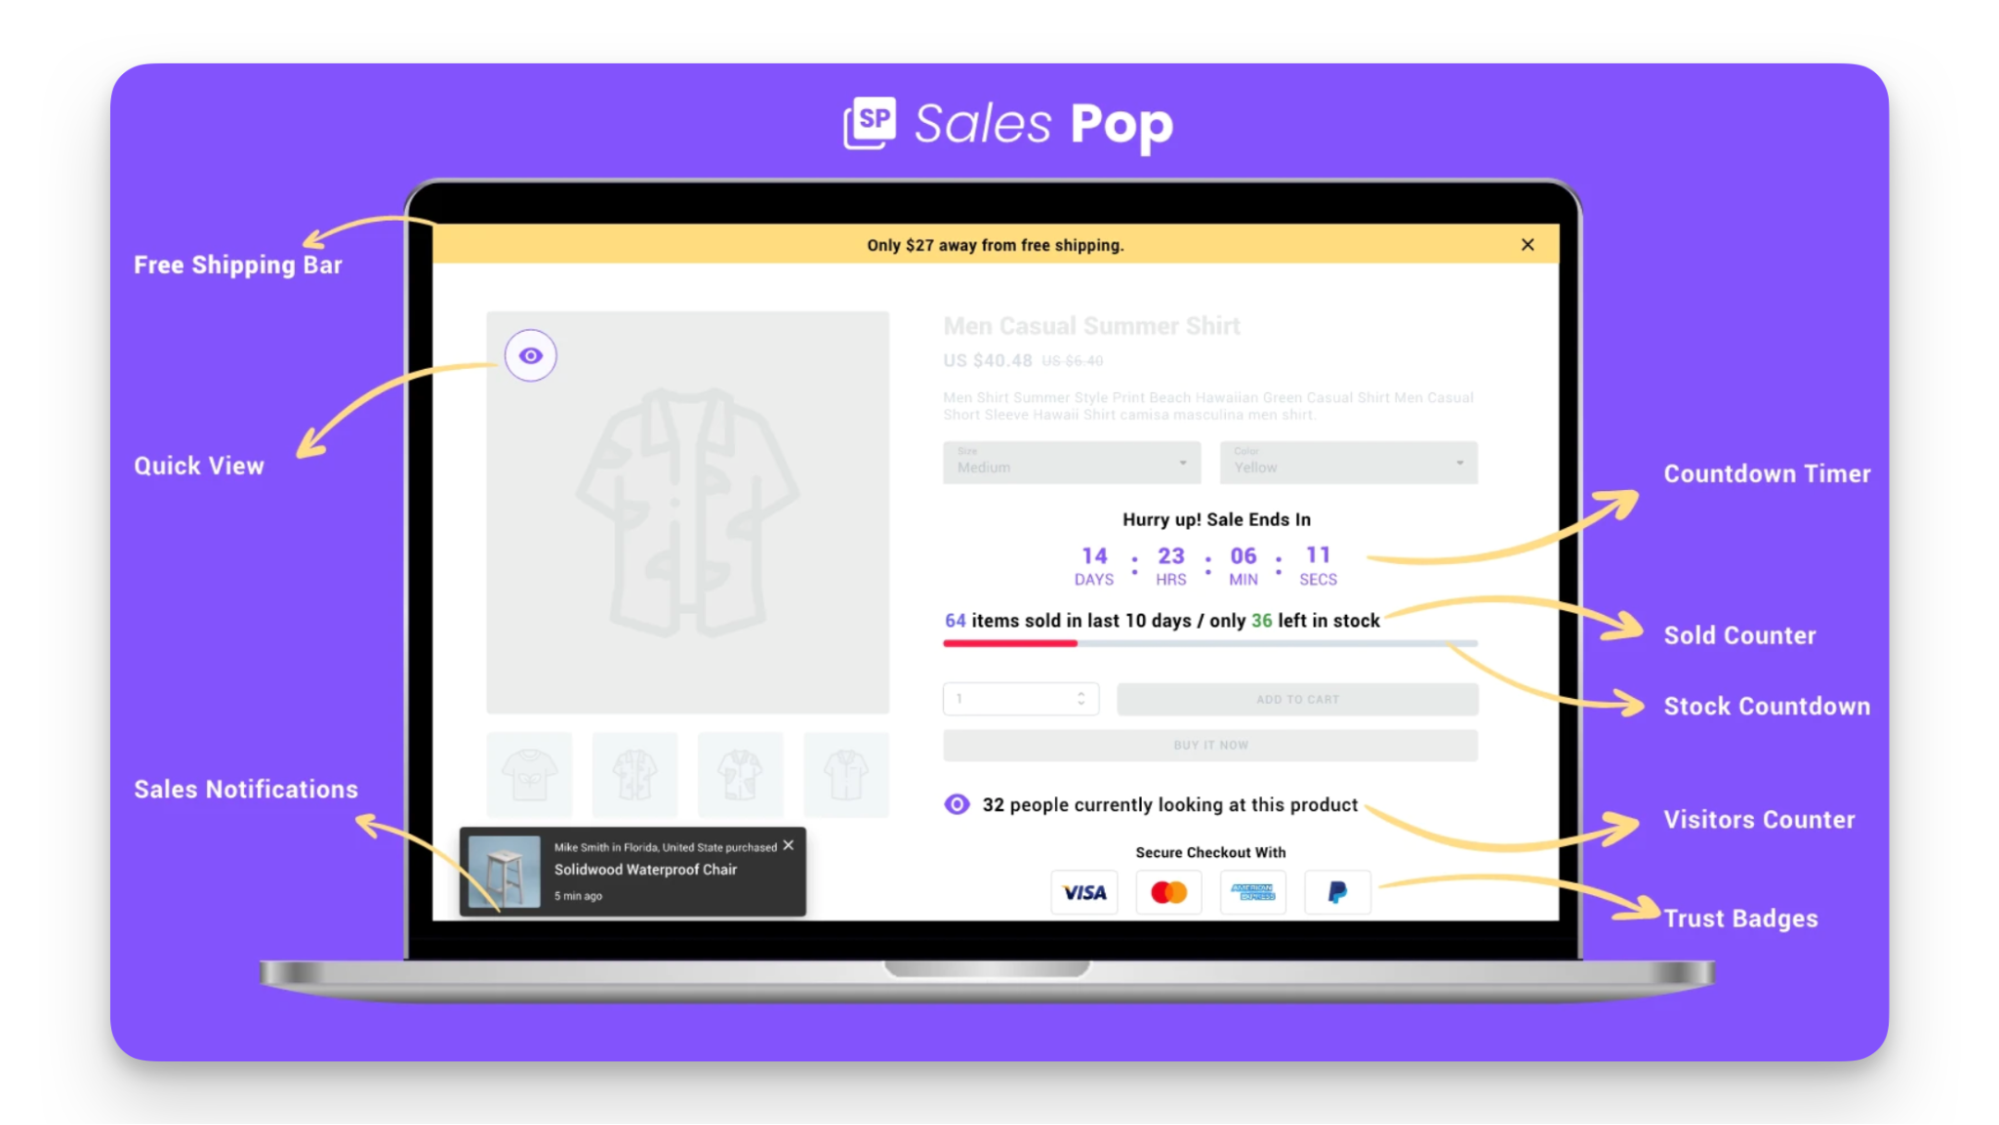 Ecommerce website interface showing sales pop-up notifications.